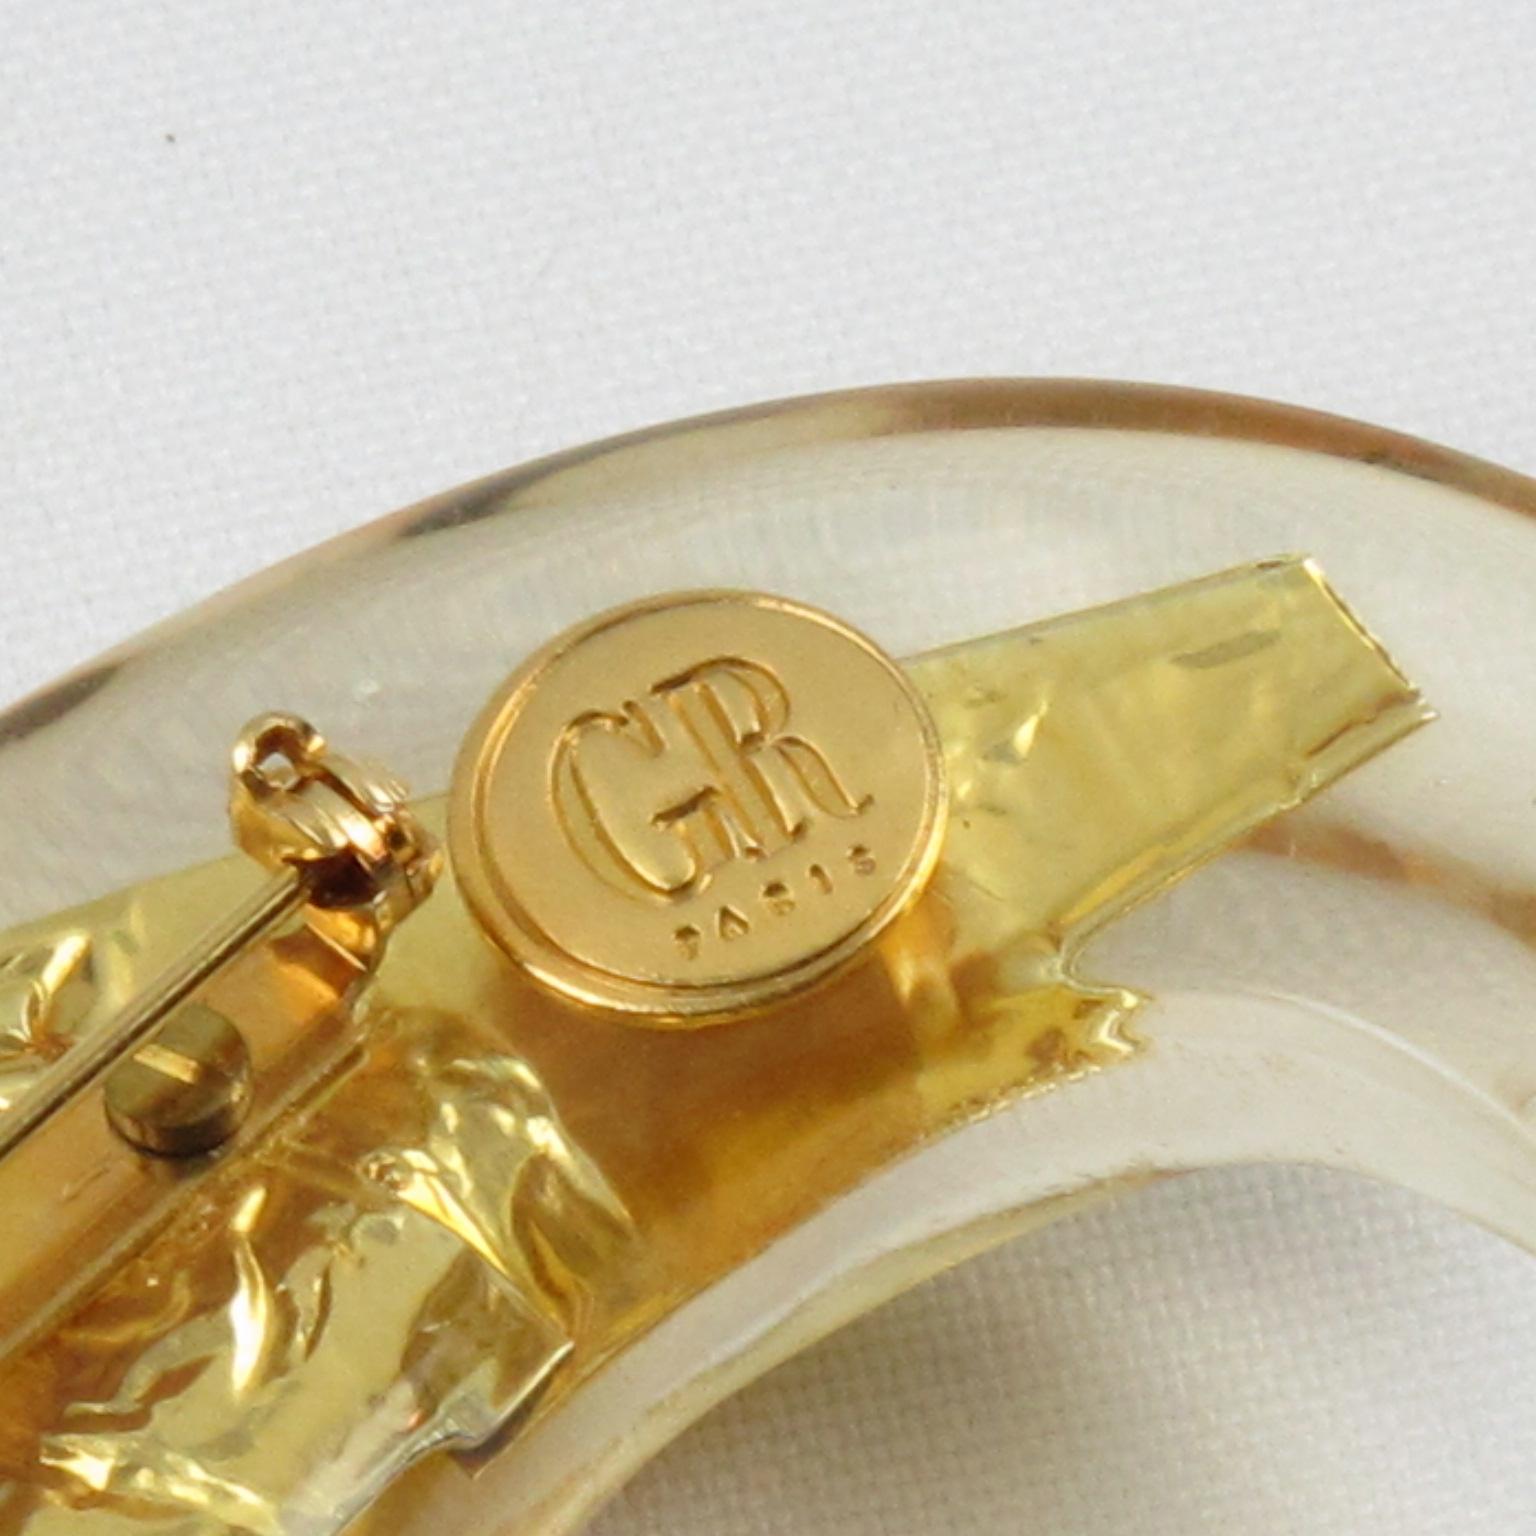 Georges Rech Paris Lucite Pin Brooch with Gold Foil Inclusions In Excellent Condition For Sale In Atlanta, GA